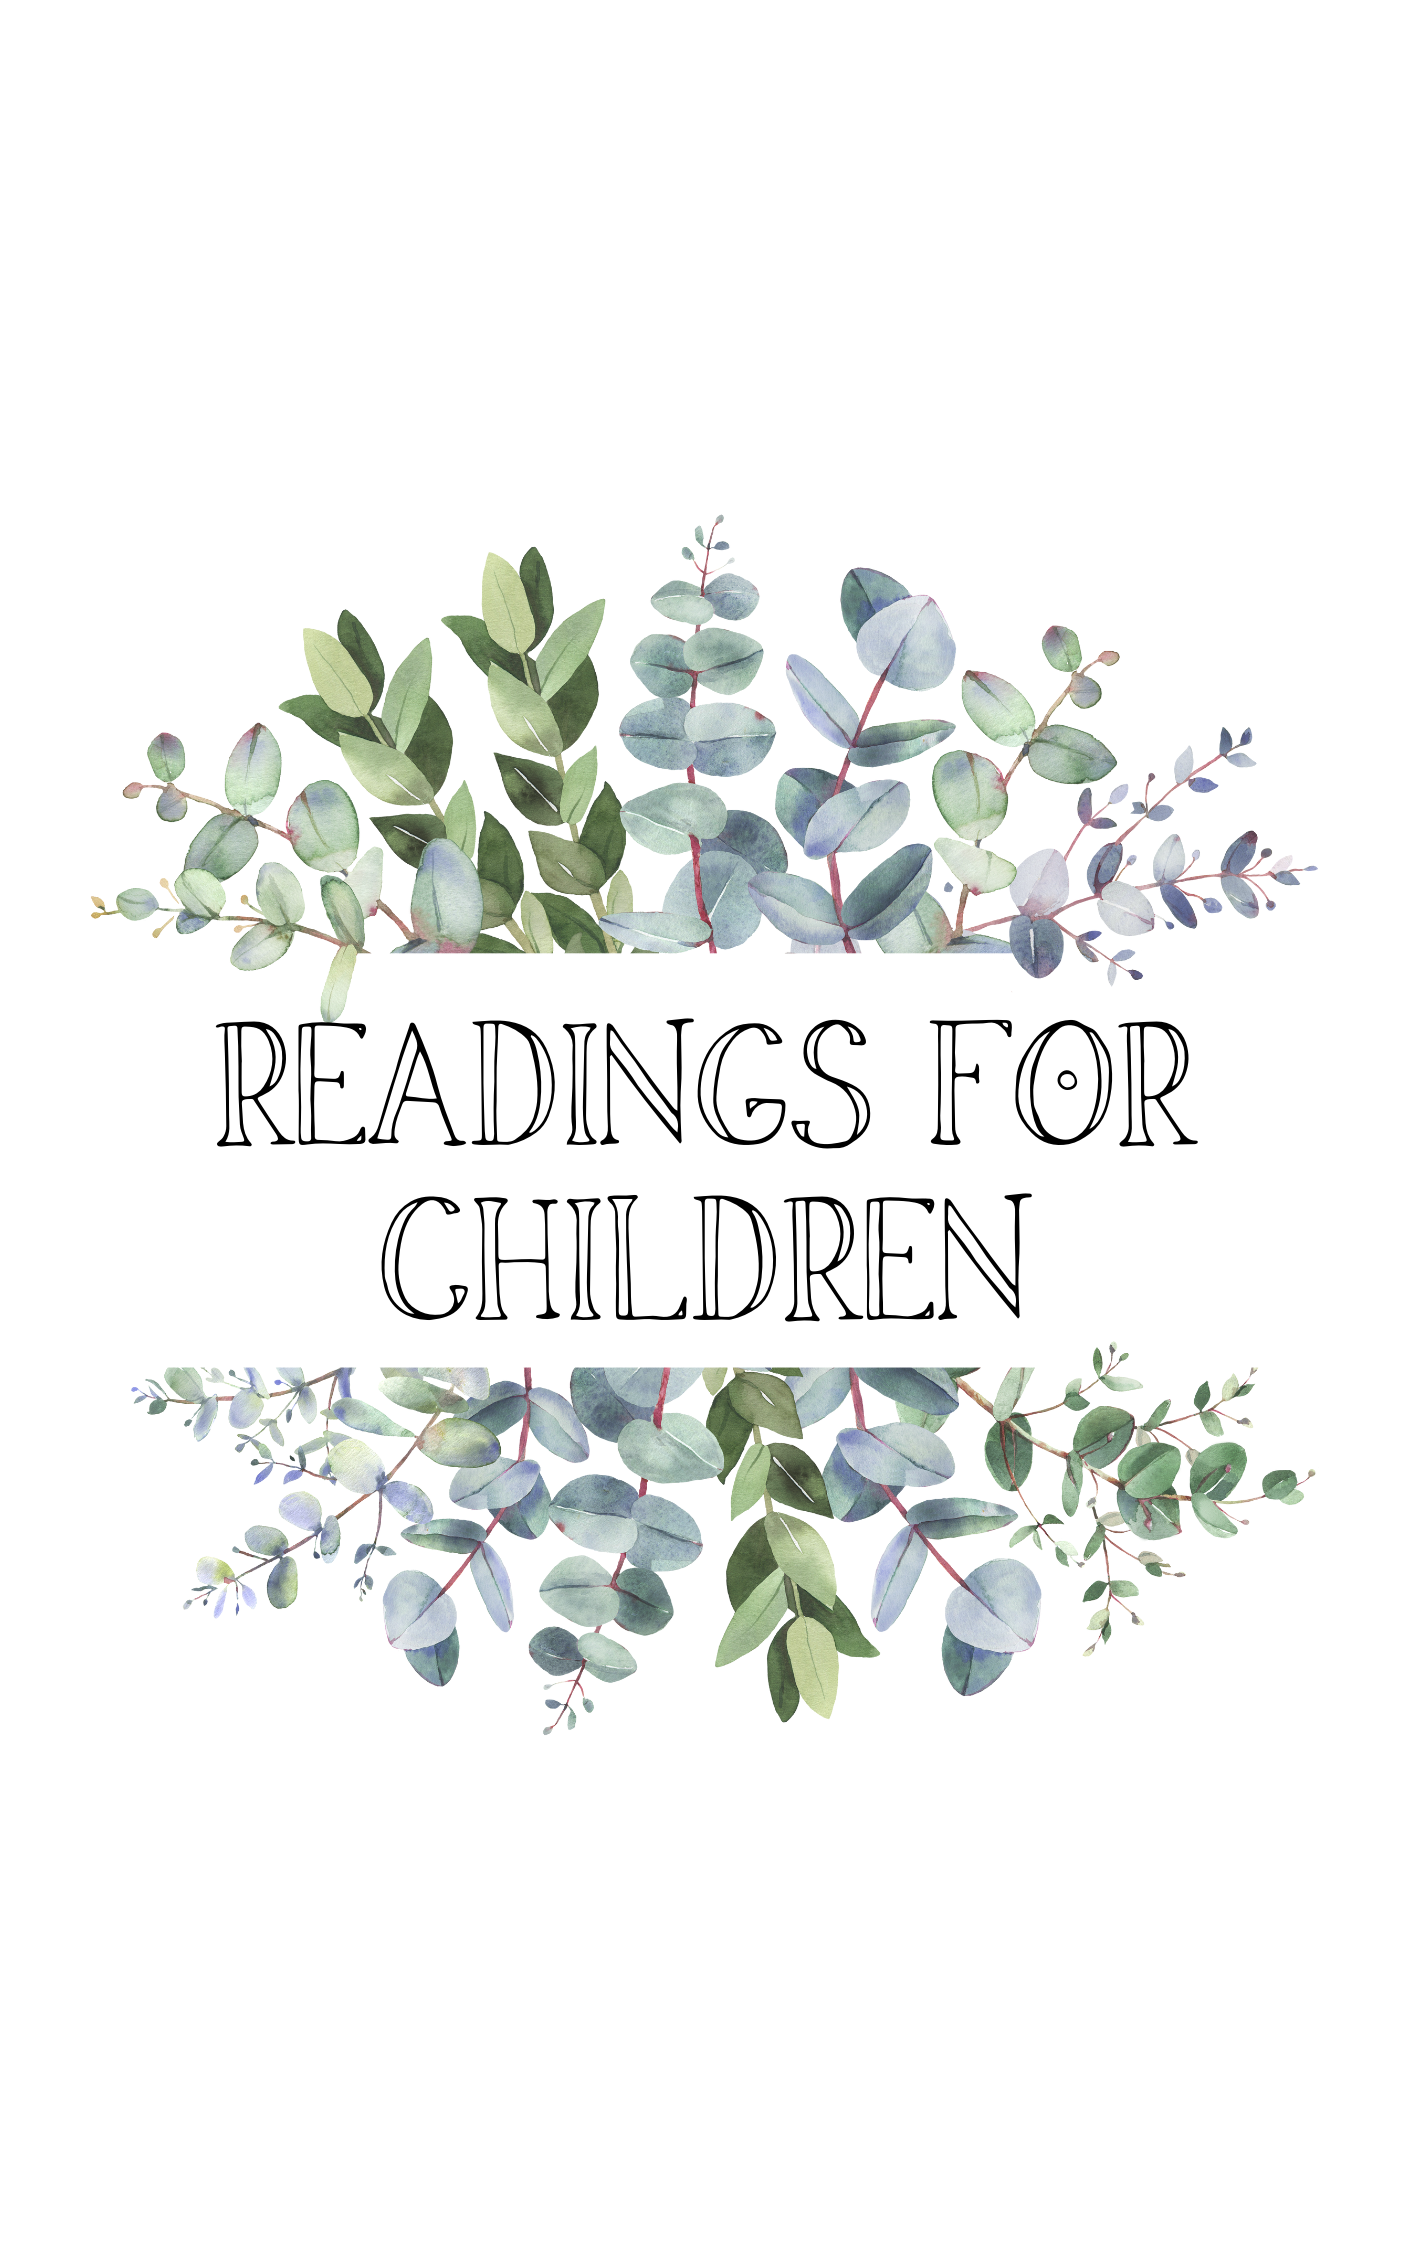 25 Perfect Wedding Readings for Children